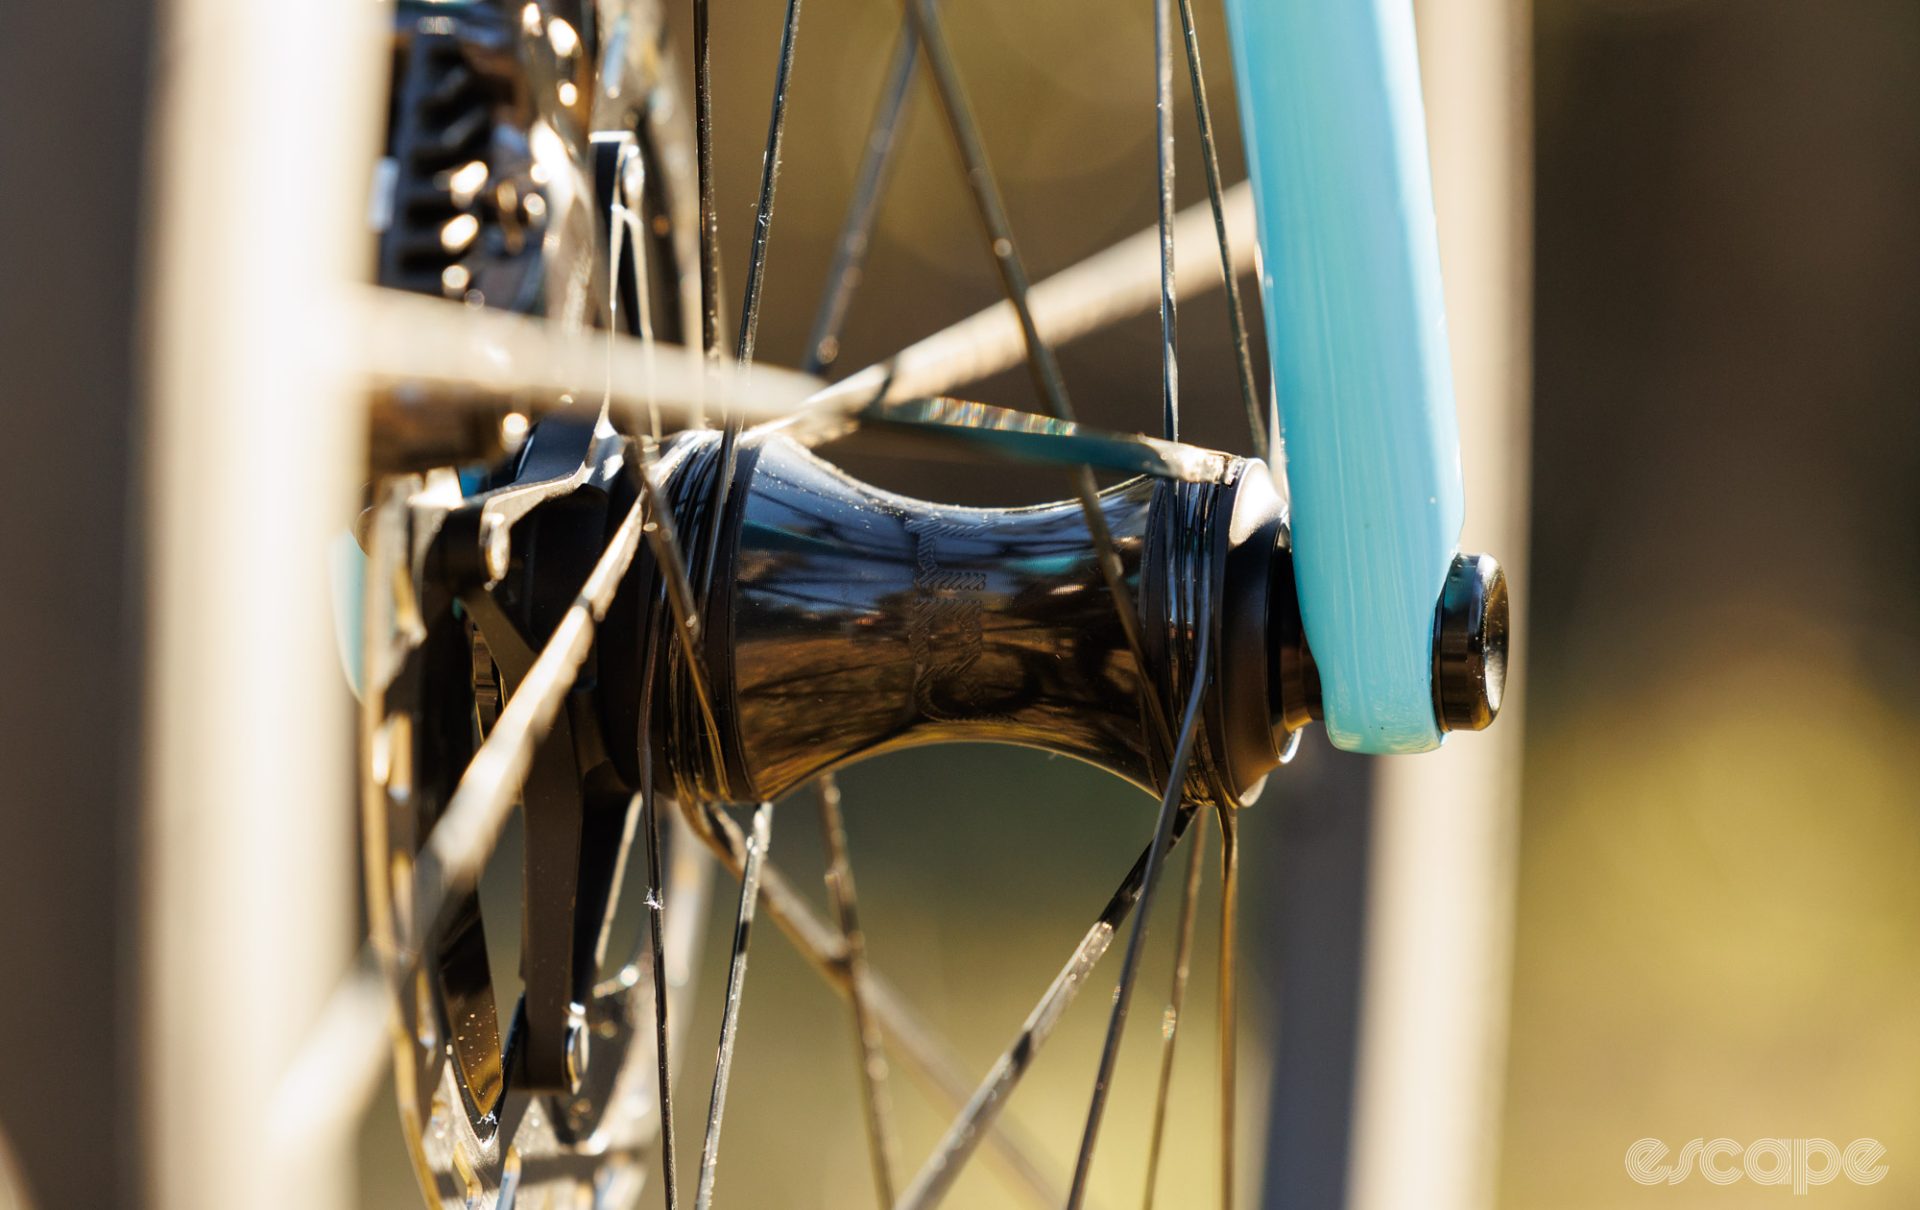 A closeup of the front hub, installed in a fork.